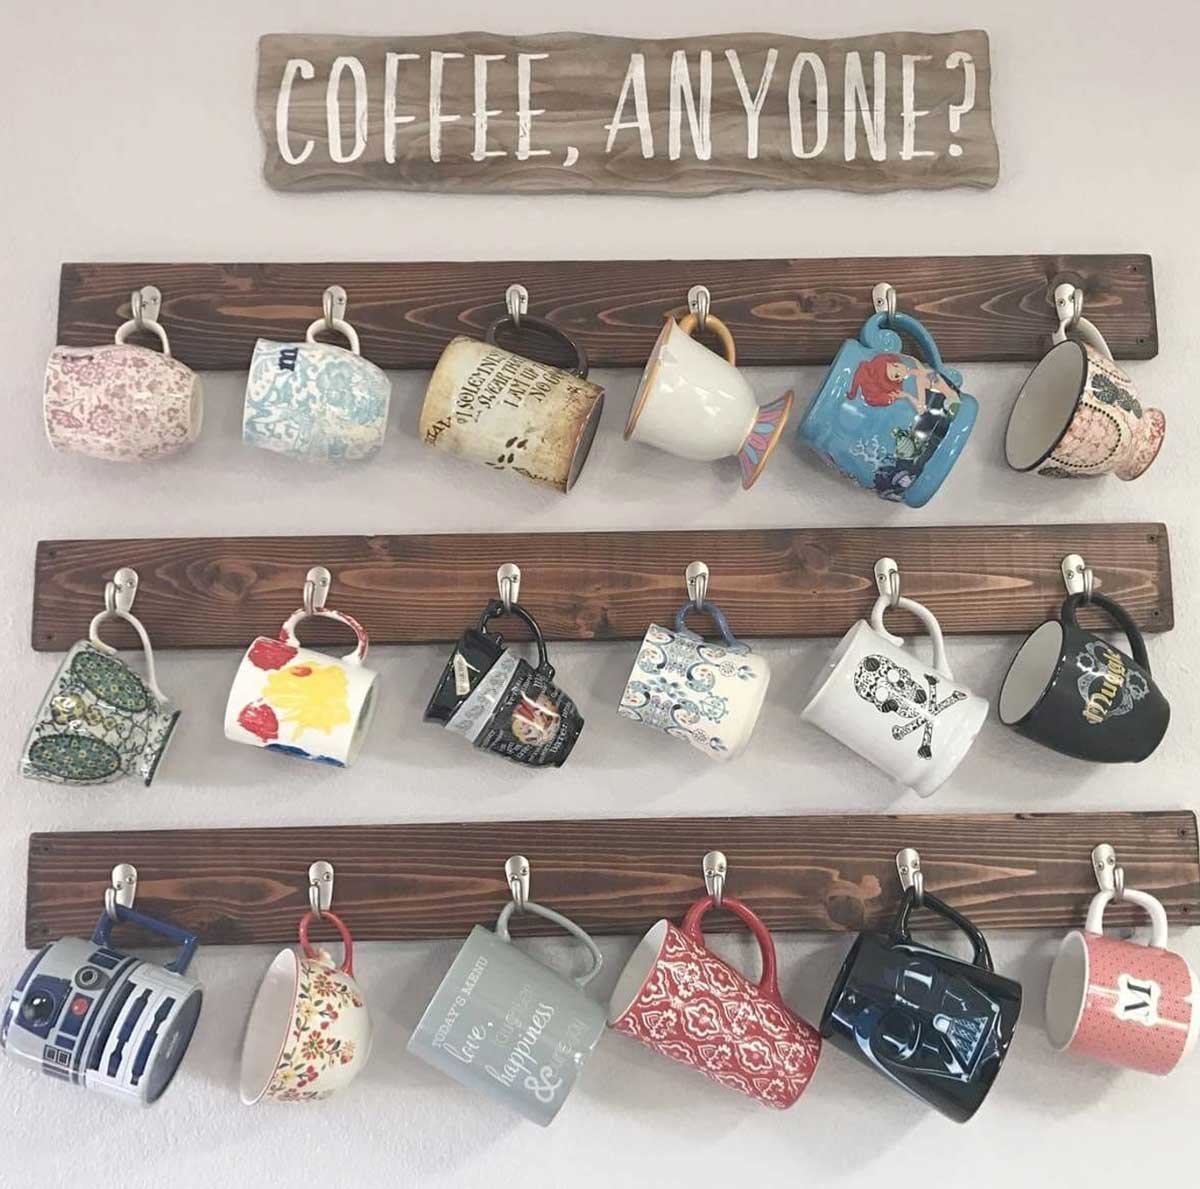 A wall hanging space to hang all of your tea and coffee mugs